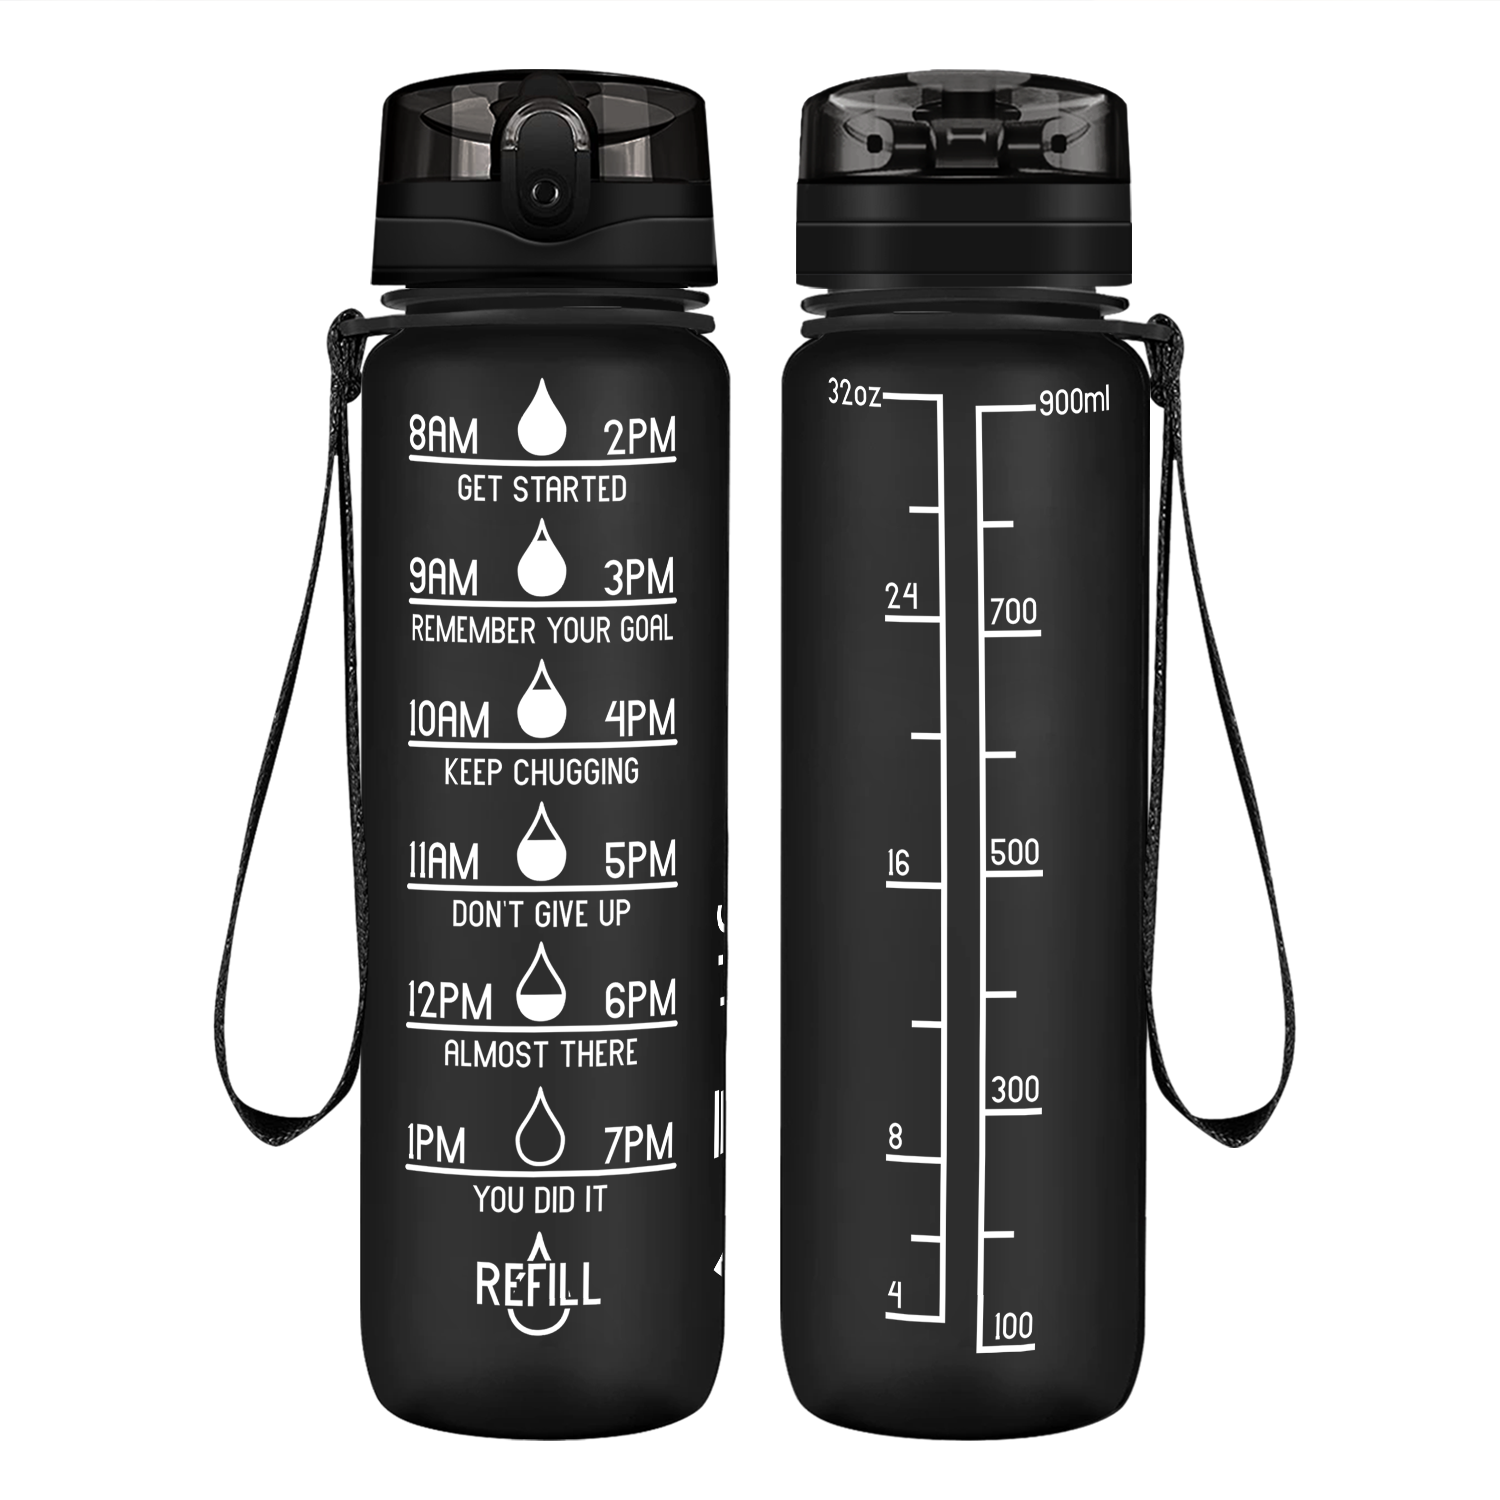 Cuptify Black Frosted Motivational Water Bottle